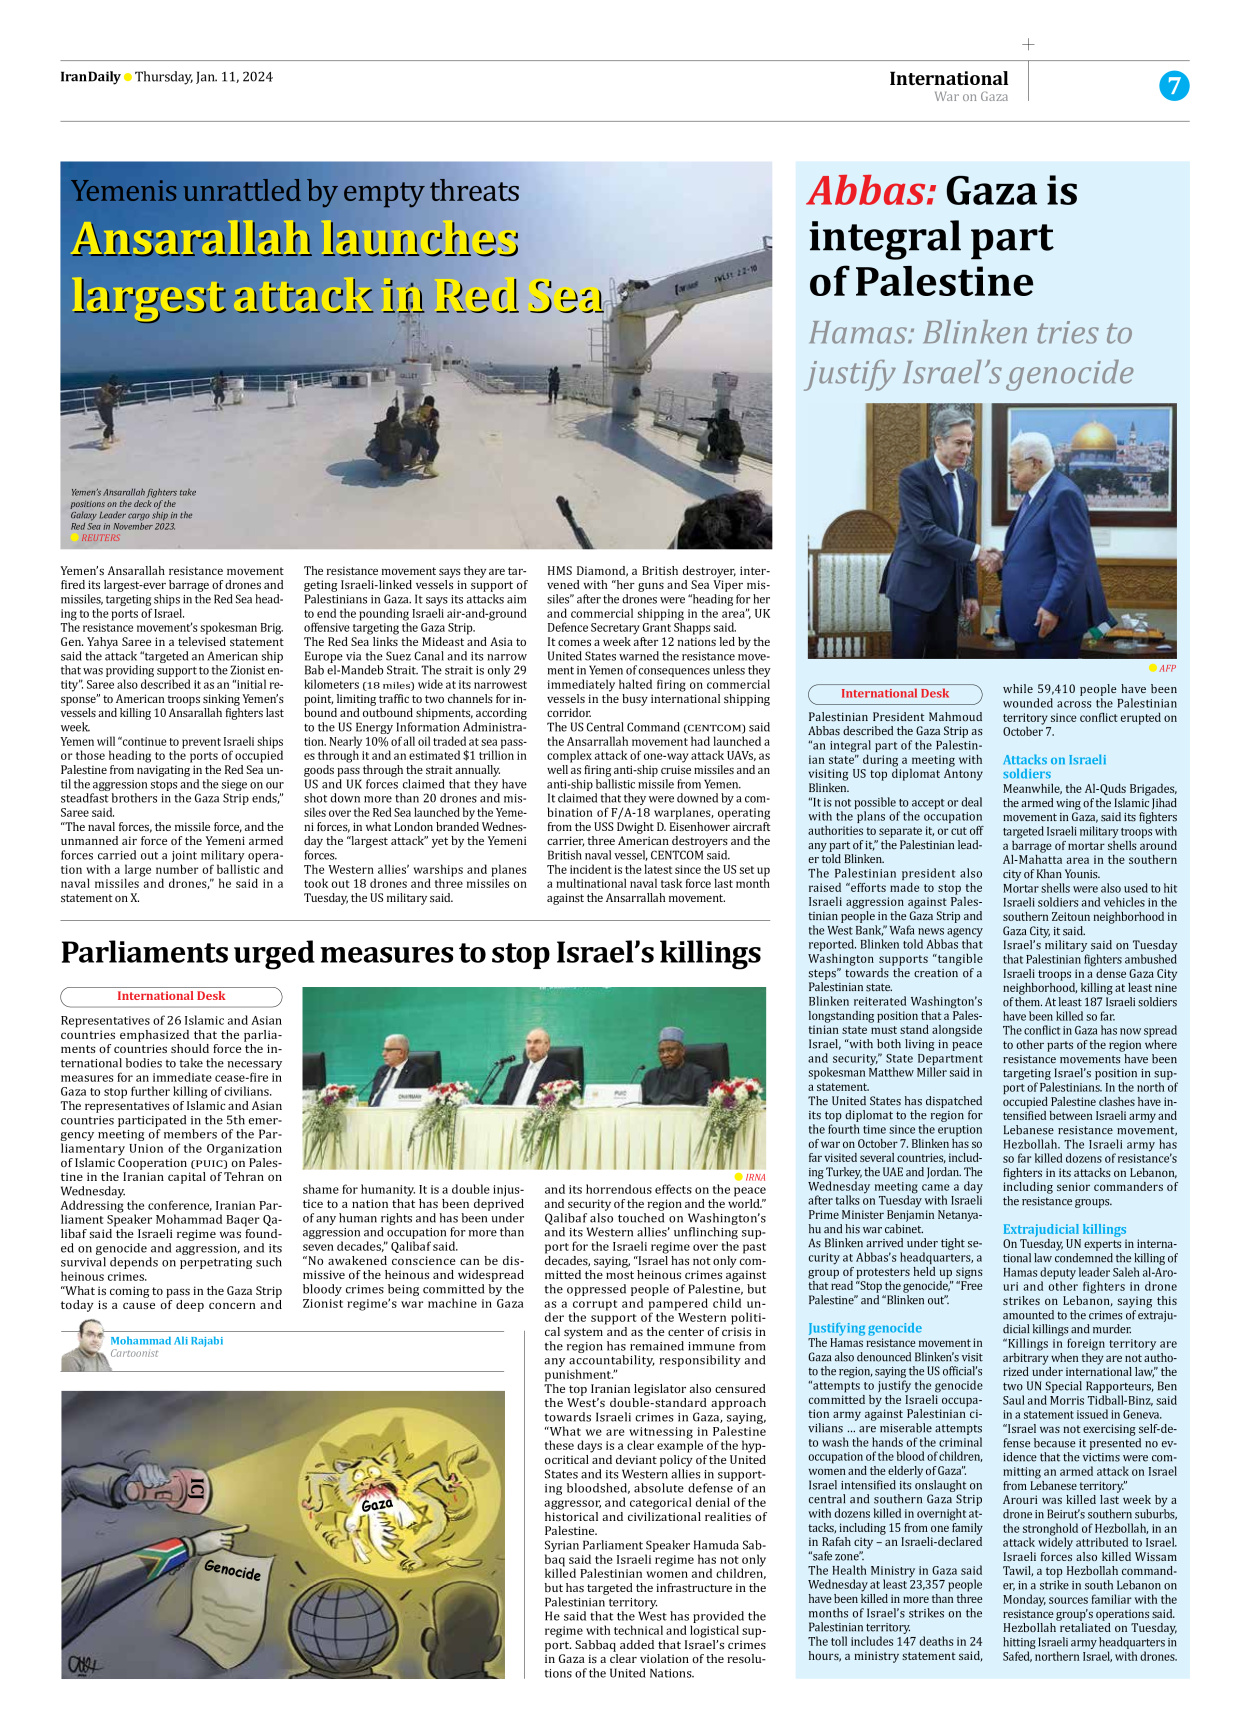 Iran Daily - Number Seven Thousand Four Hundred and Eighty Two - 11 January 2024 - Page 7